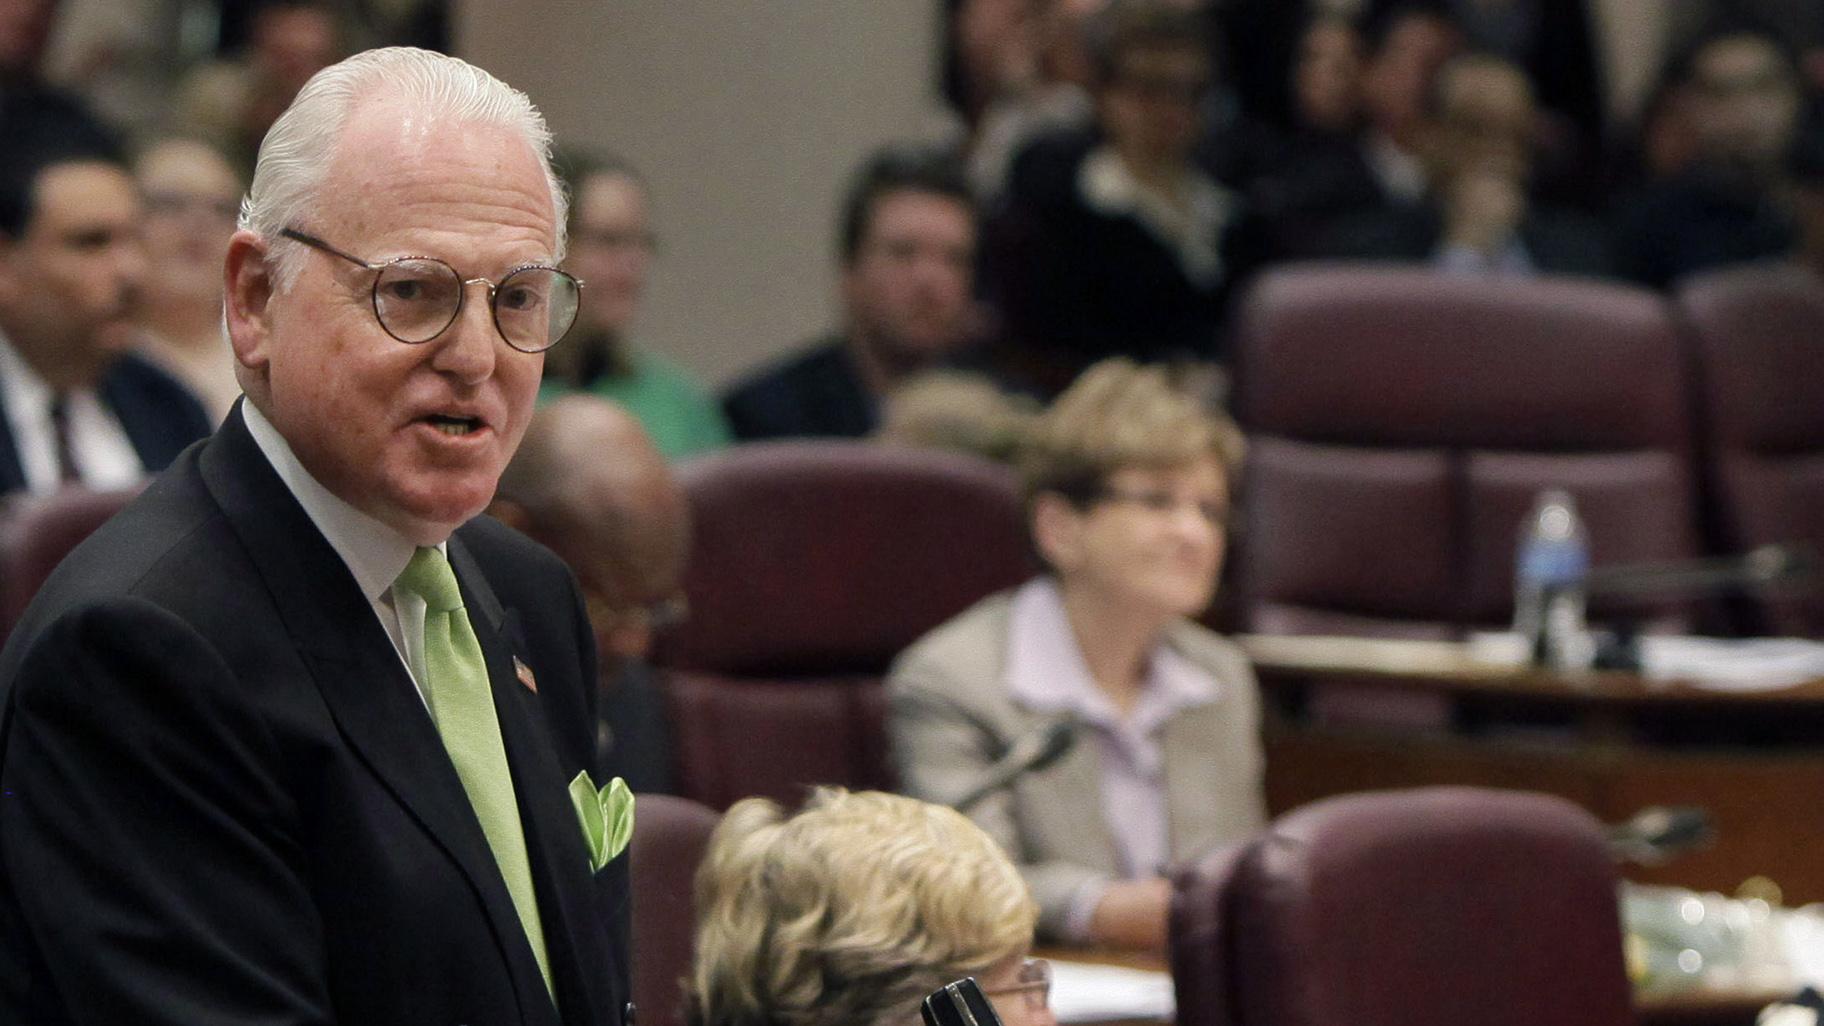 In this May 4, 2011 file photo, Ald. Ed Burke speaks at a Chicago City Council meeting. (AP Photo / M. Spencer Green, File)